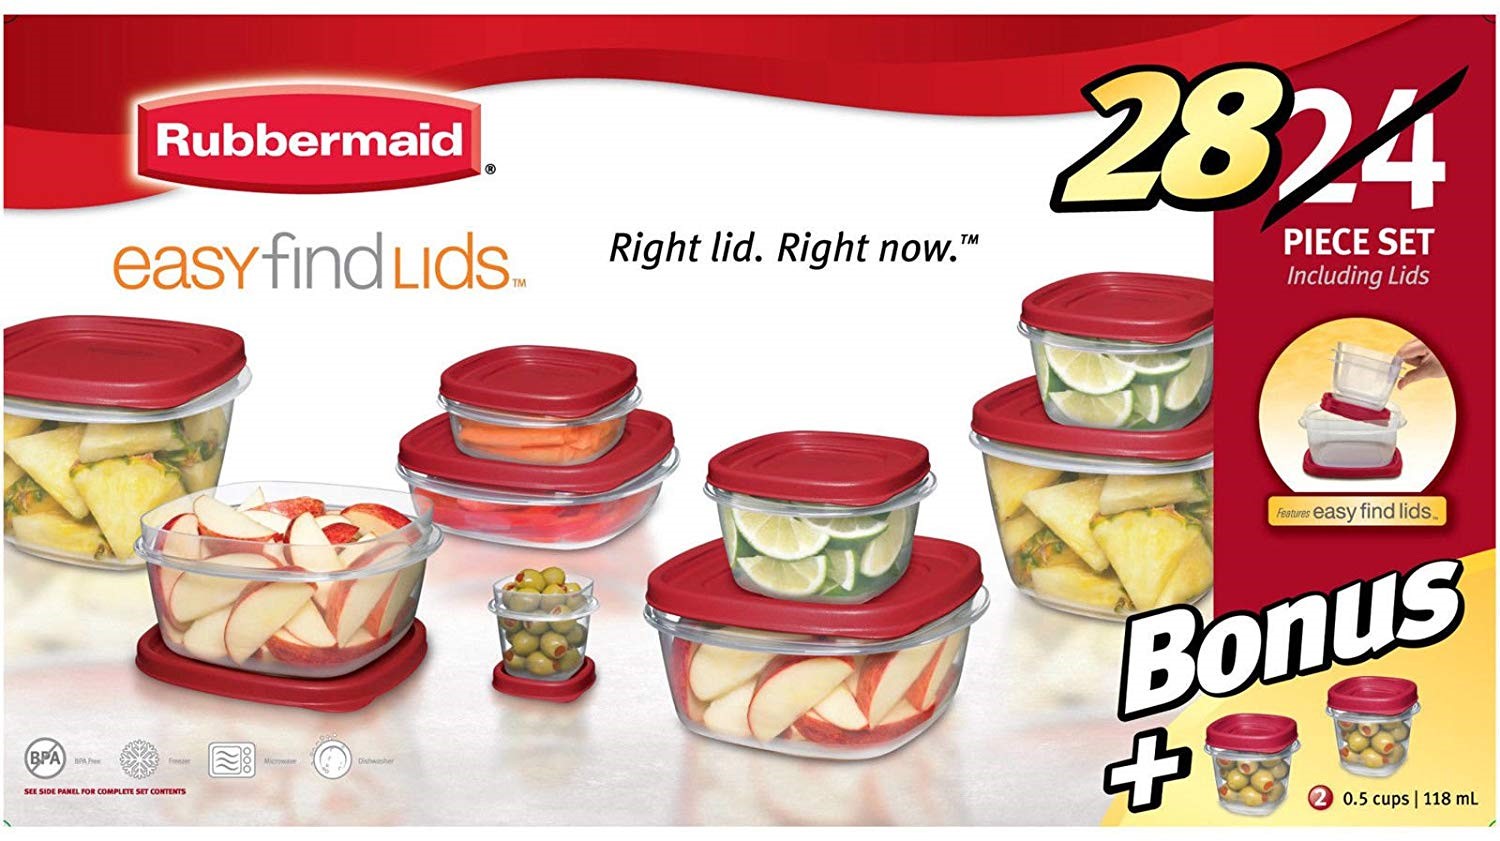 Rubbermaid Easy Find Lids Food Storage Containers with Lids - BPA Free Durable Plastic Food Containers Great for Home, School, Travel - Freezer, Microwave, and Dishwasher Safe - 28 Piece Set - Red - image 1 of 7